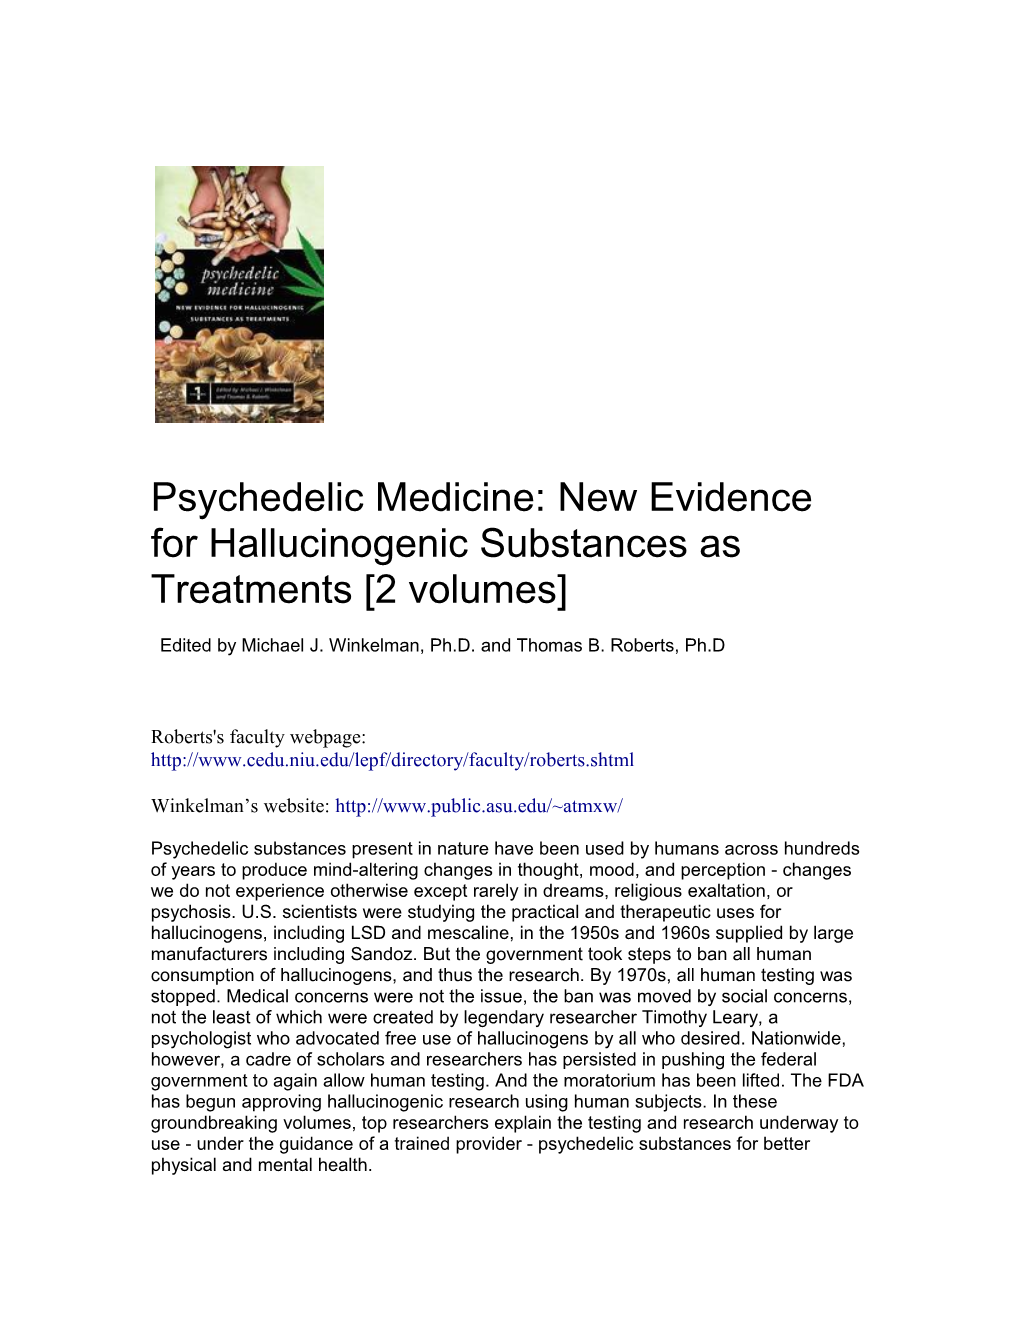 Psychedelic Medicine: New Evidence for Hallucinogenic Substances As Treatments 2 Volumes